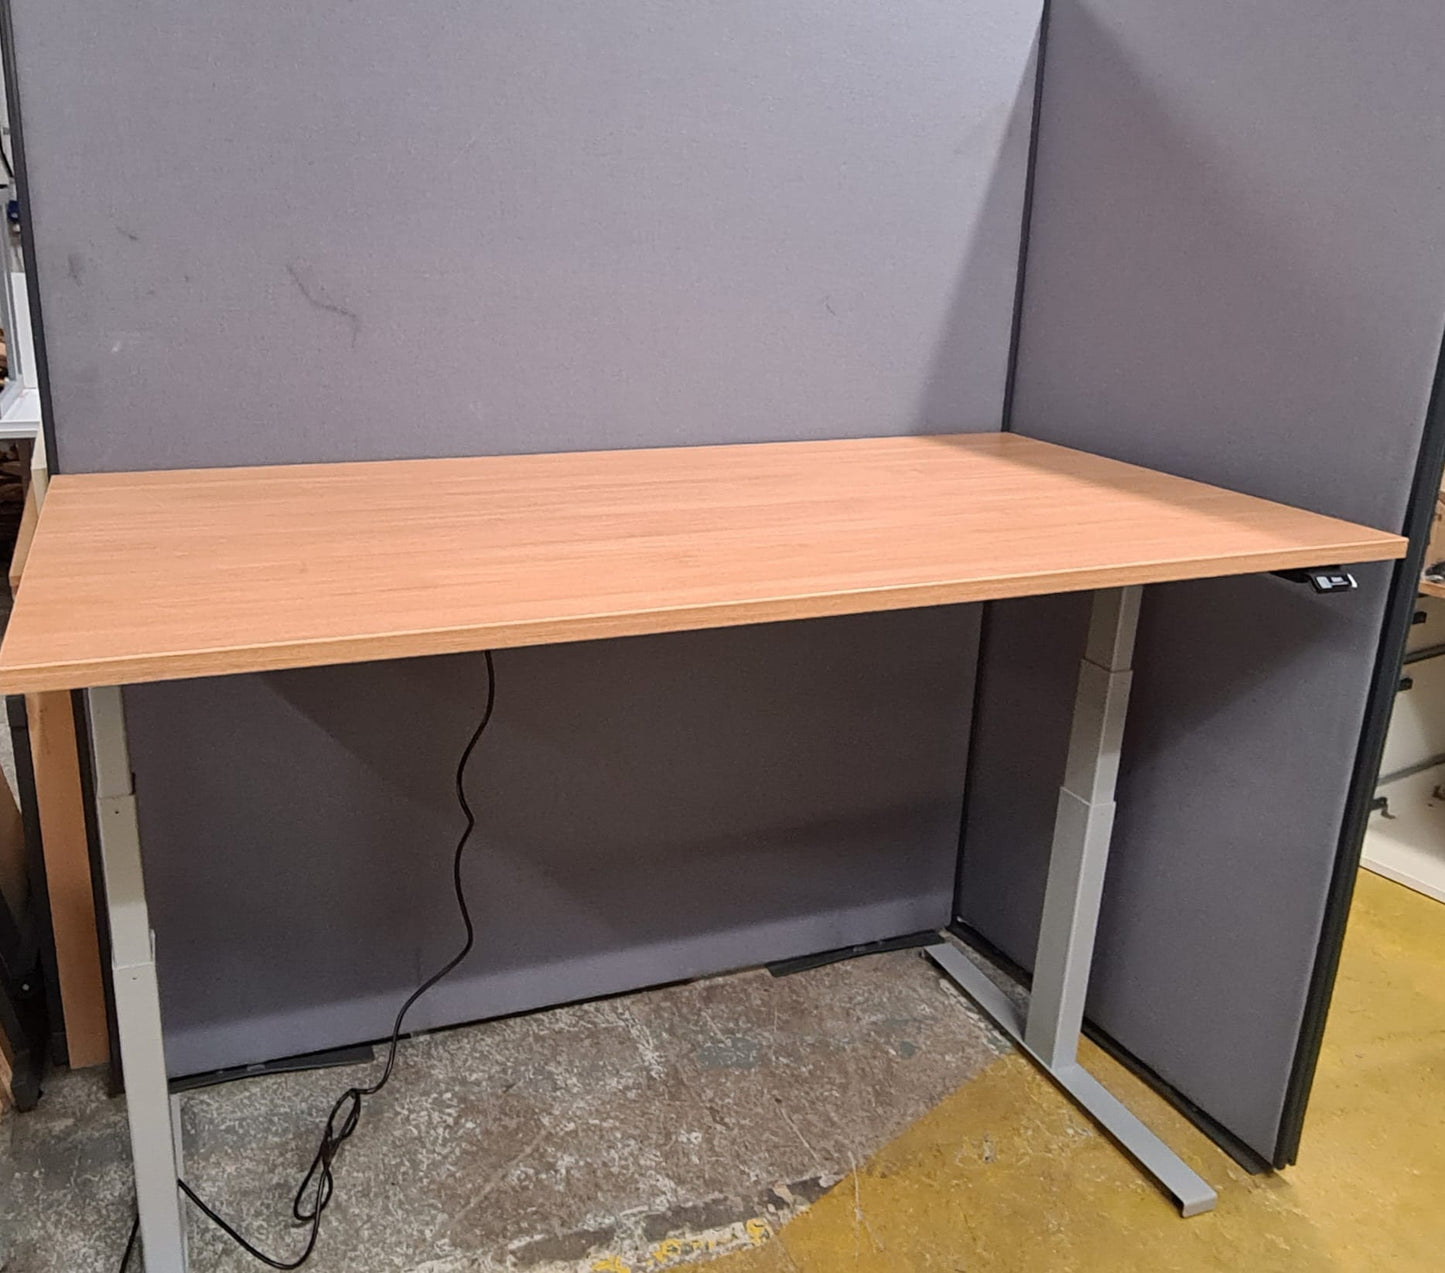 Ex Demo Straight ELECTRIC height adjustable desk - silver metal frame, VARIOUS SIZE TOPS 1200 TO 1600L